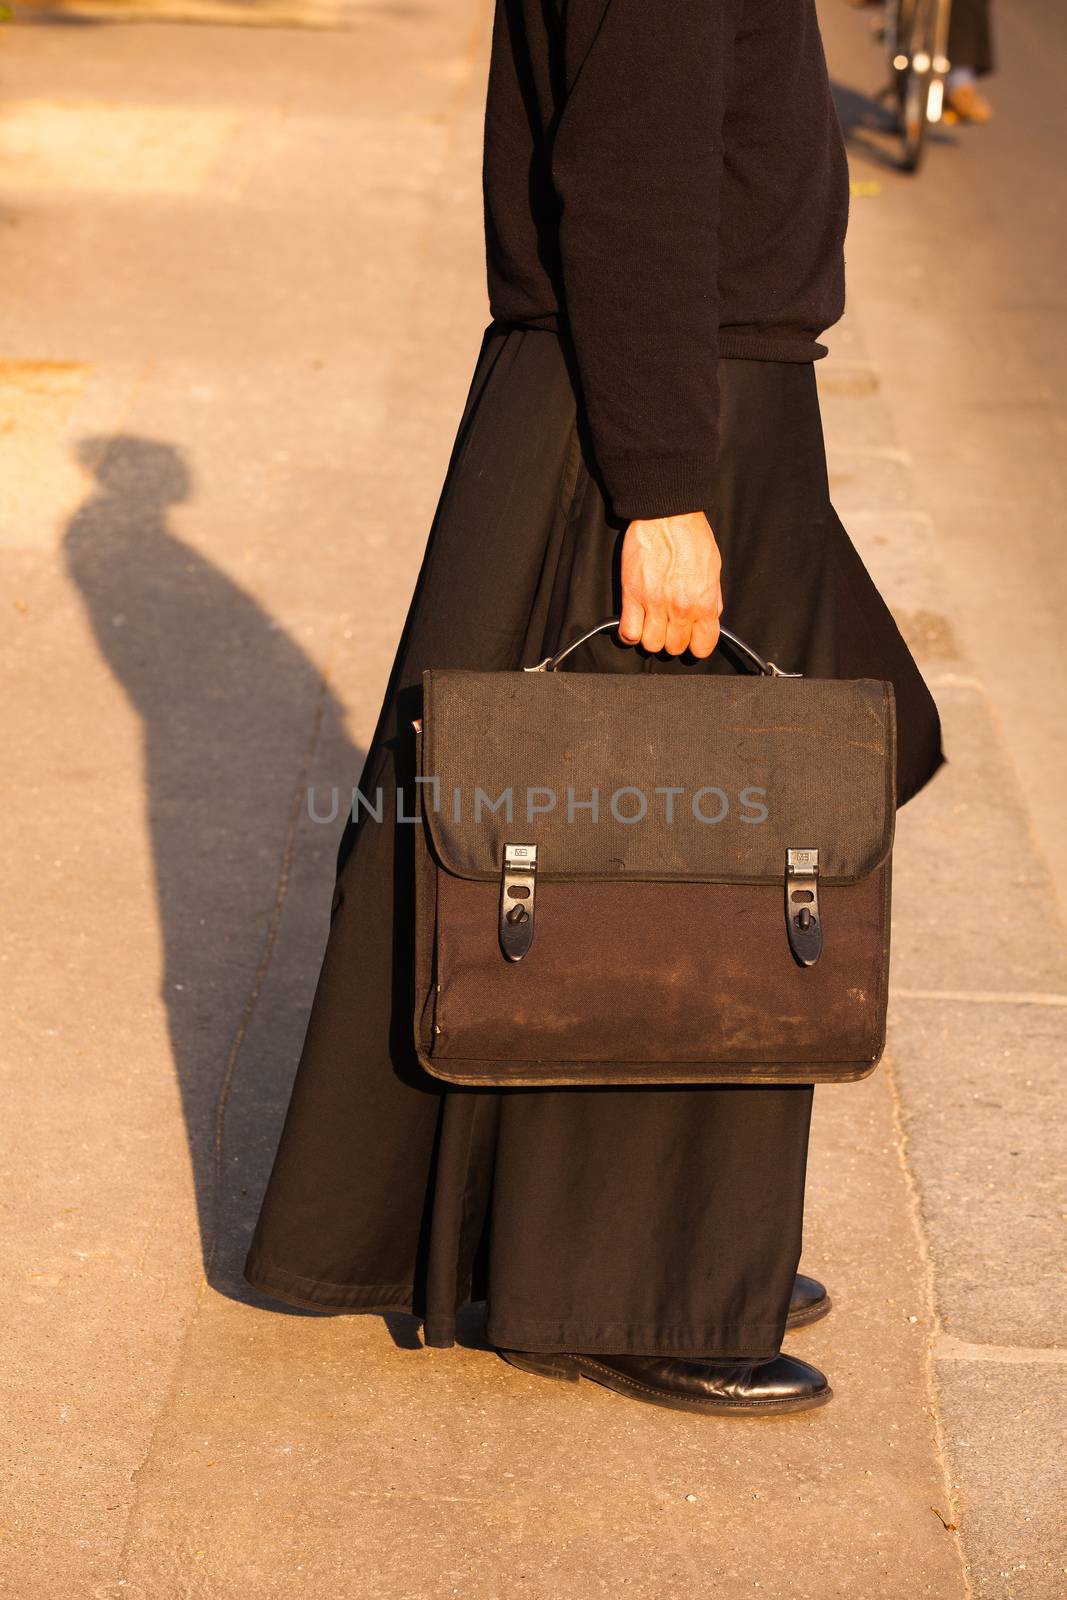 The detail of the priest on the street in Paris, France by CaptureLight